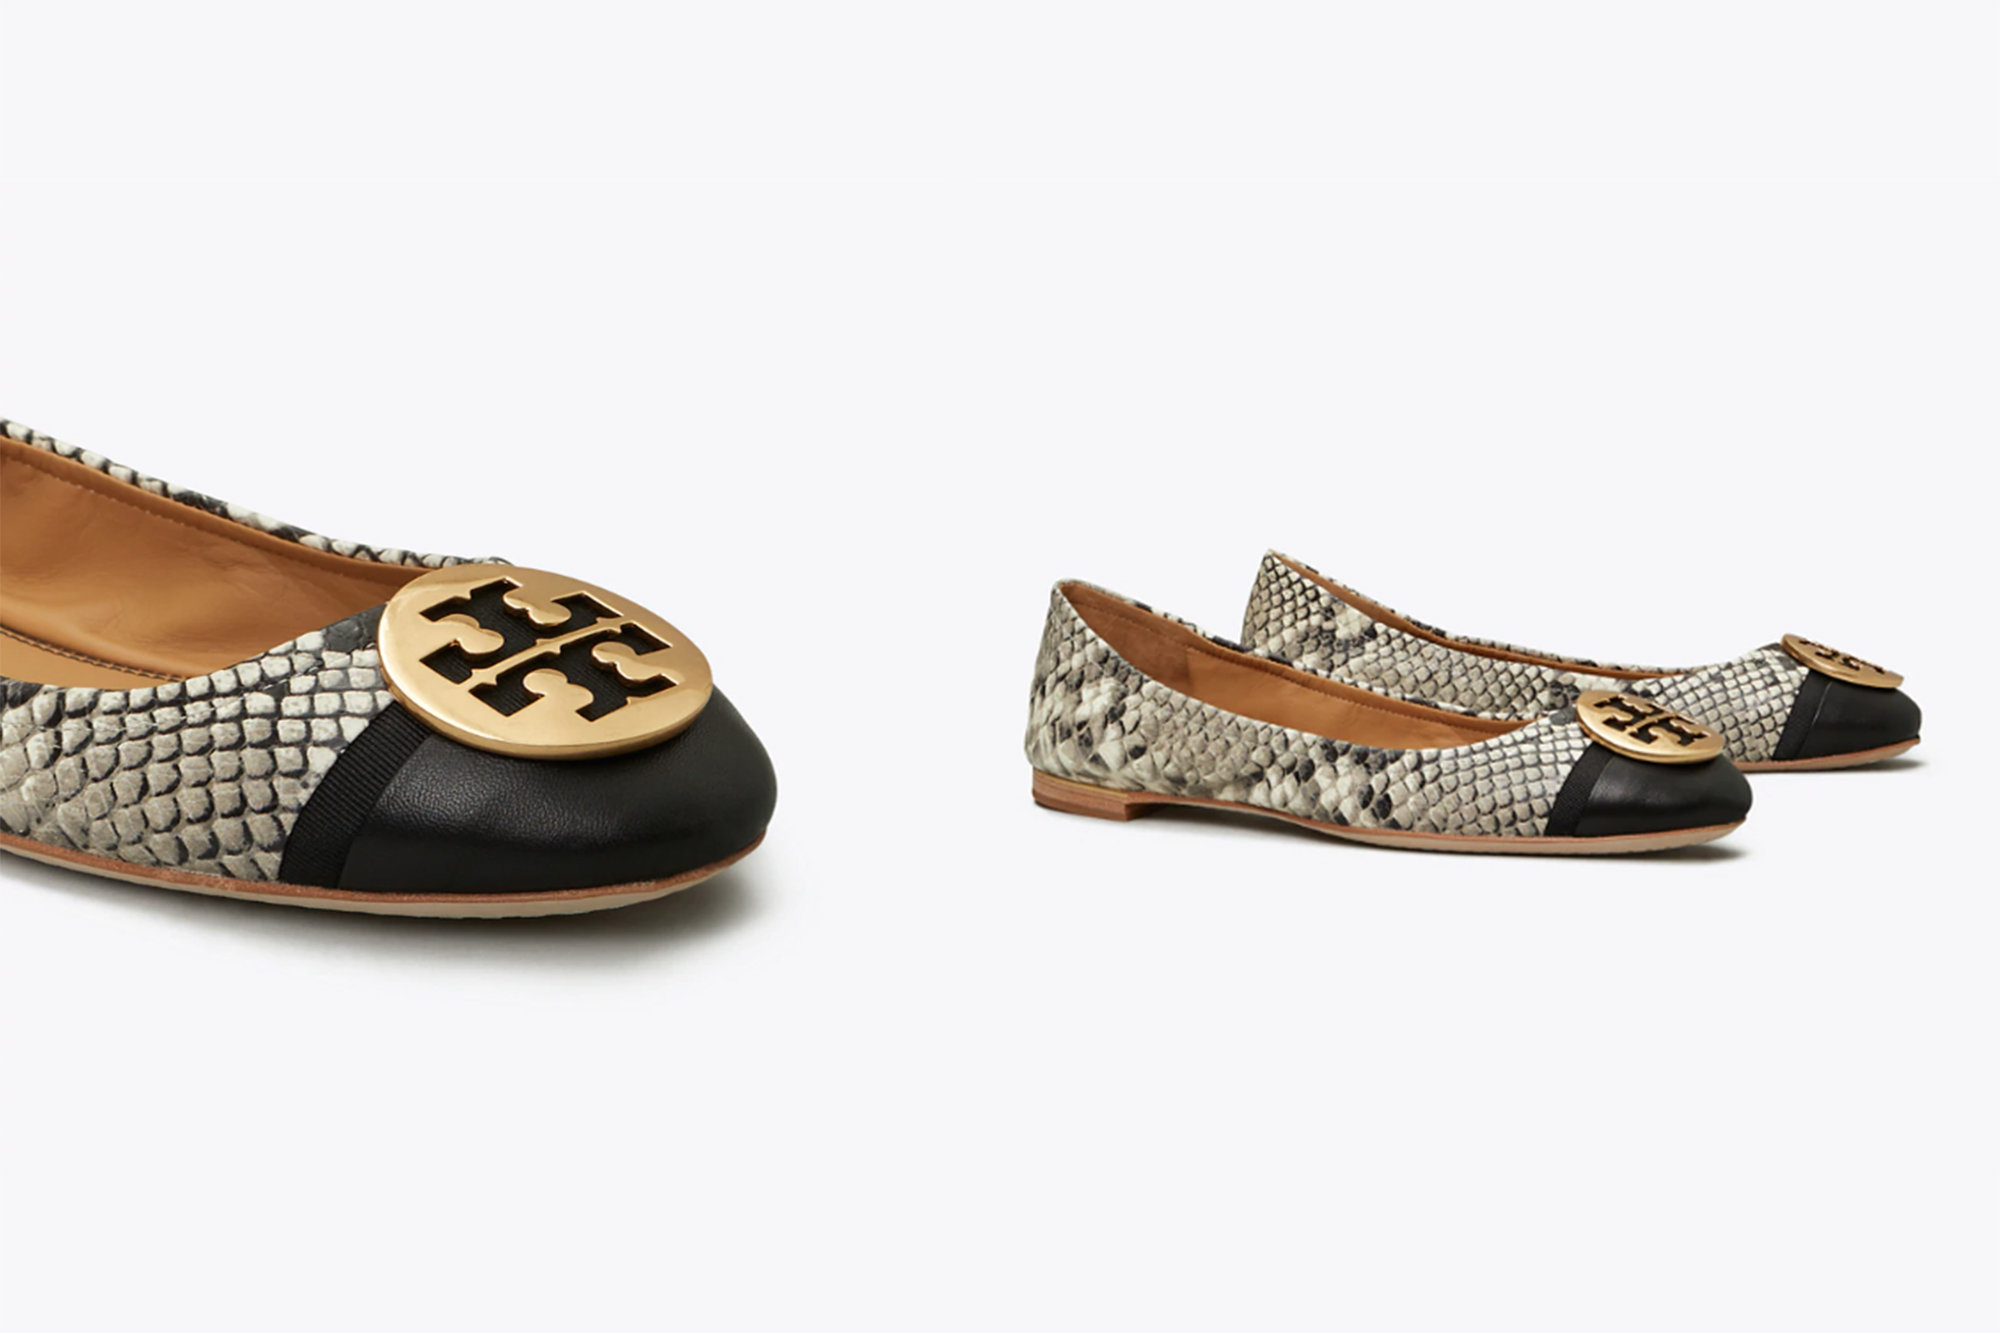 Tory Burch Shoes Are an Elevated Take 